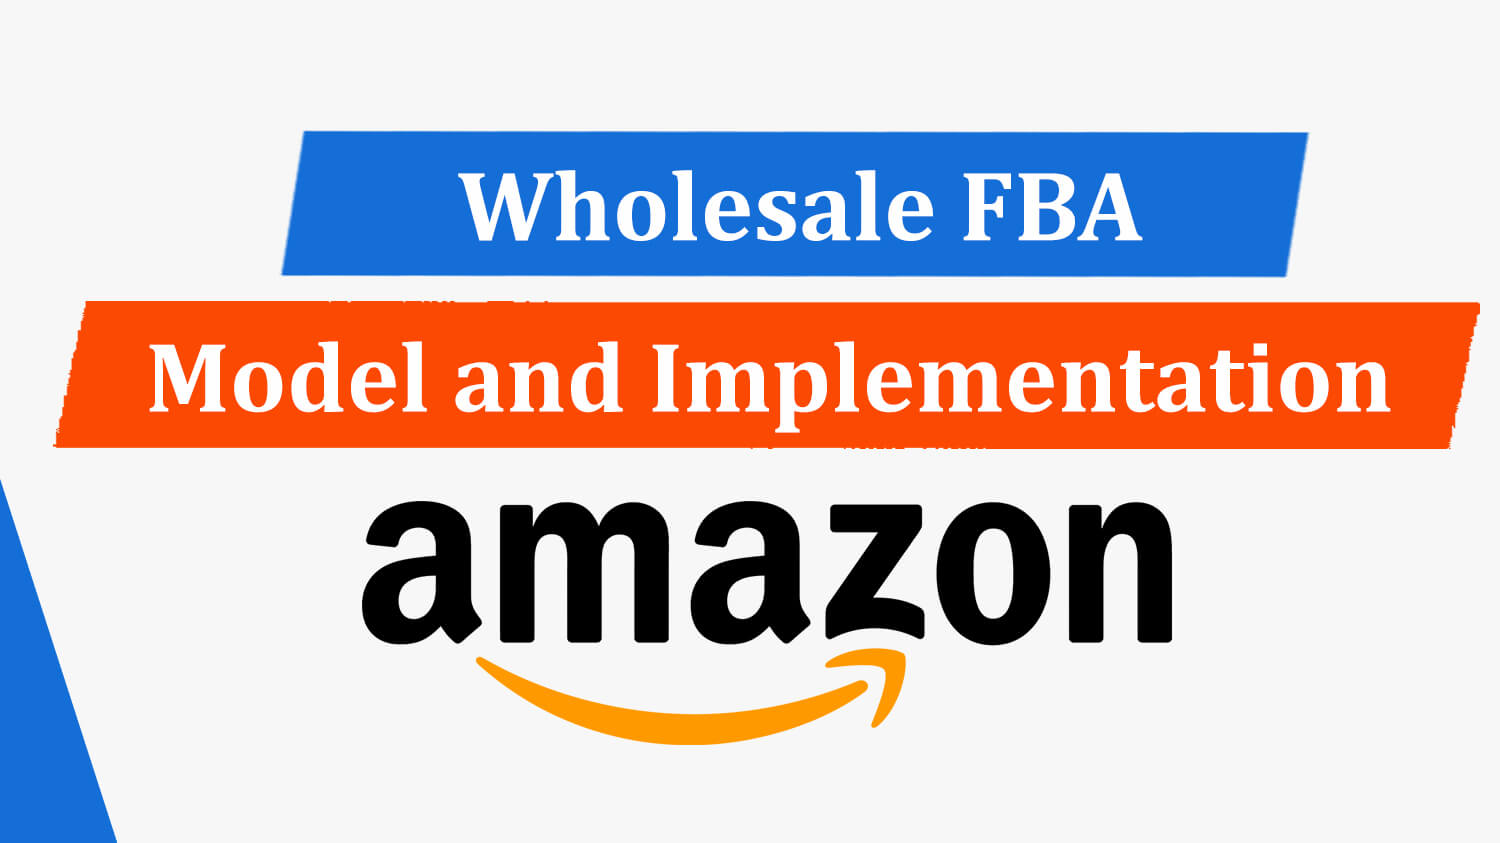 Wholesale FBA Model and Implementation